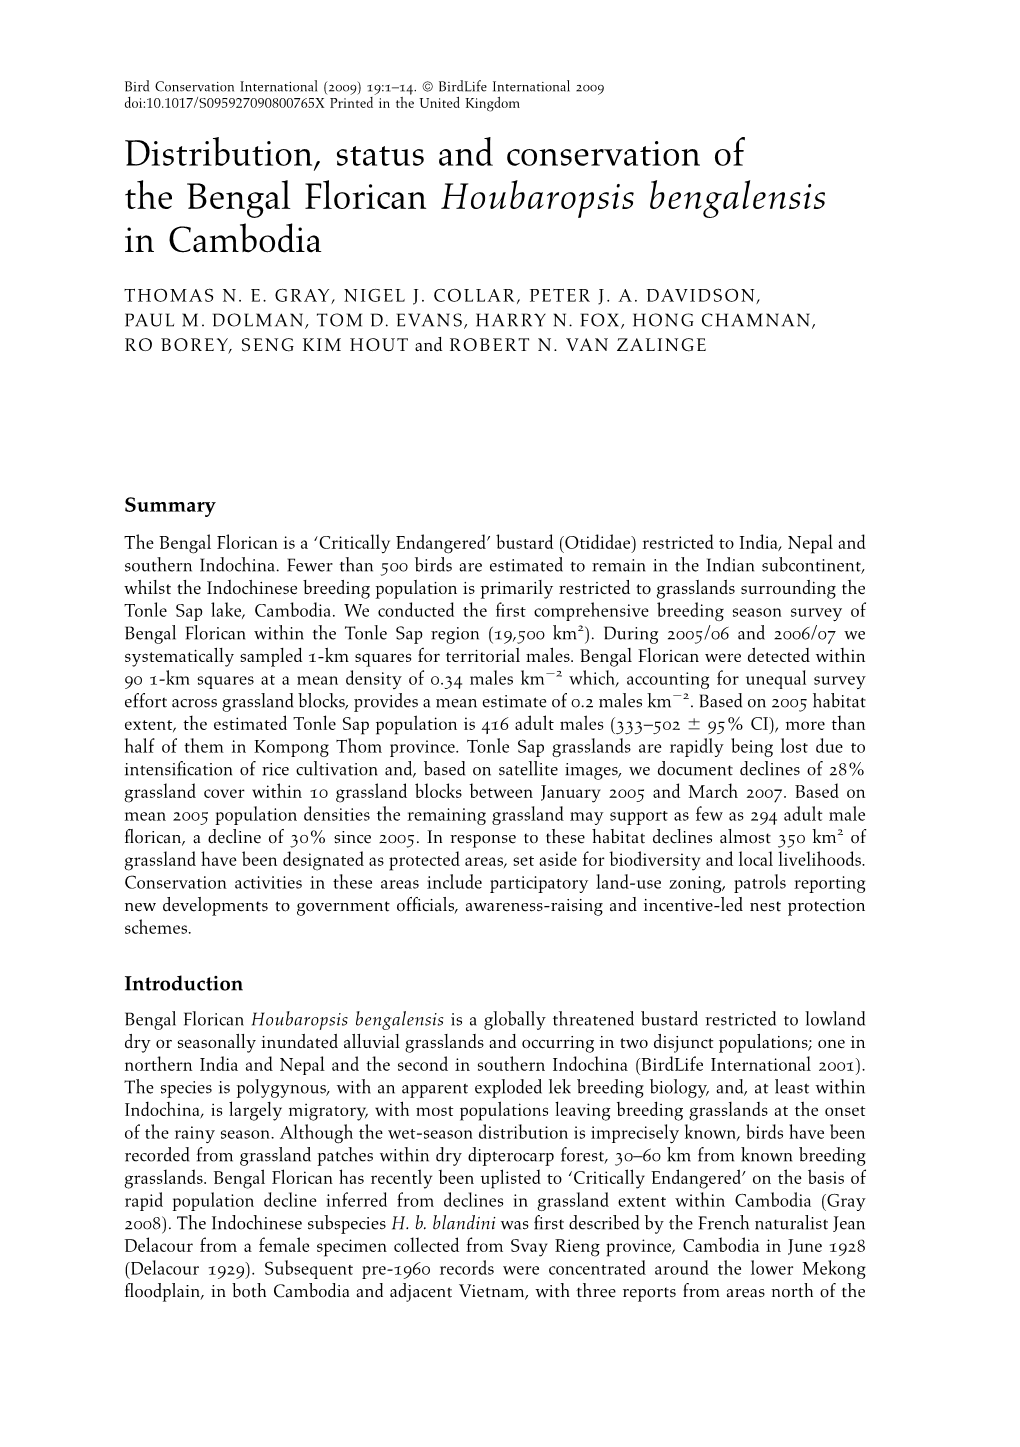 Distribution, Status and Conservation of the Bengal Florican Houbaropsis Bengalensis in Cambodia